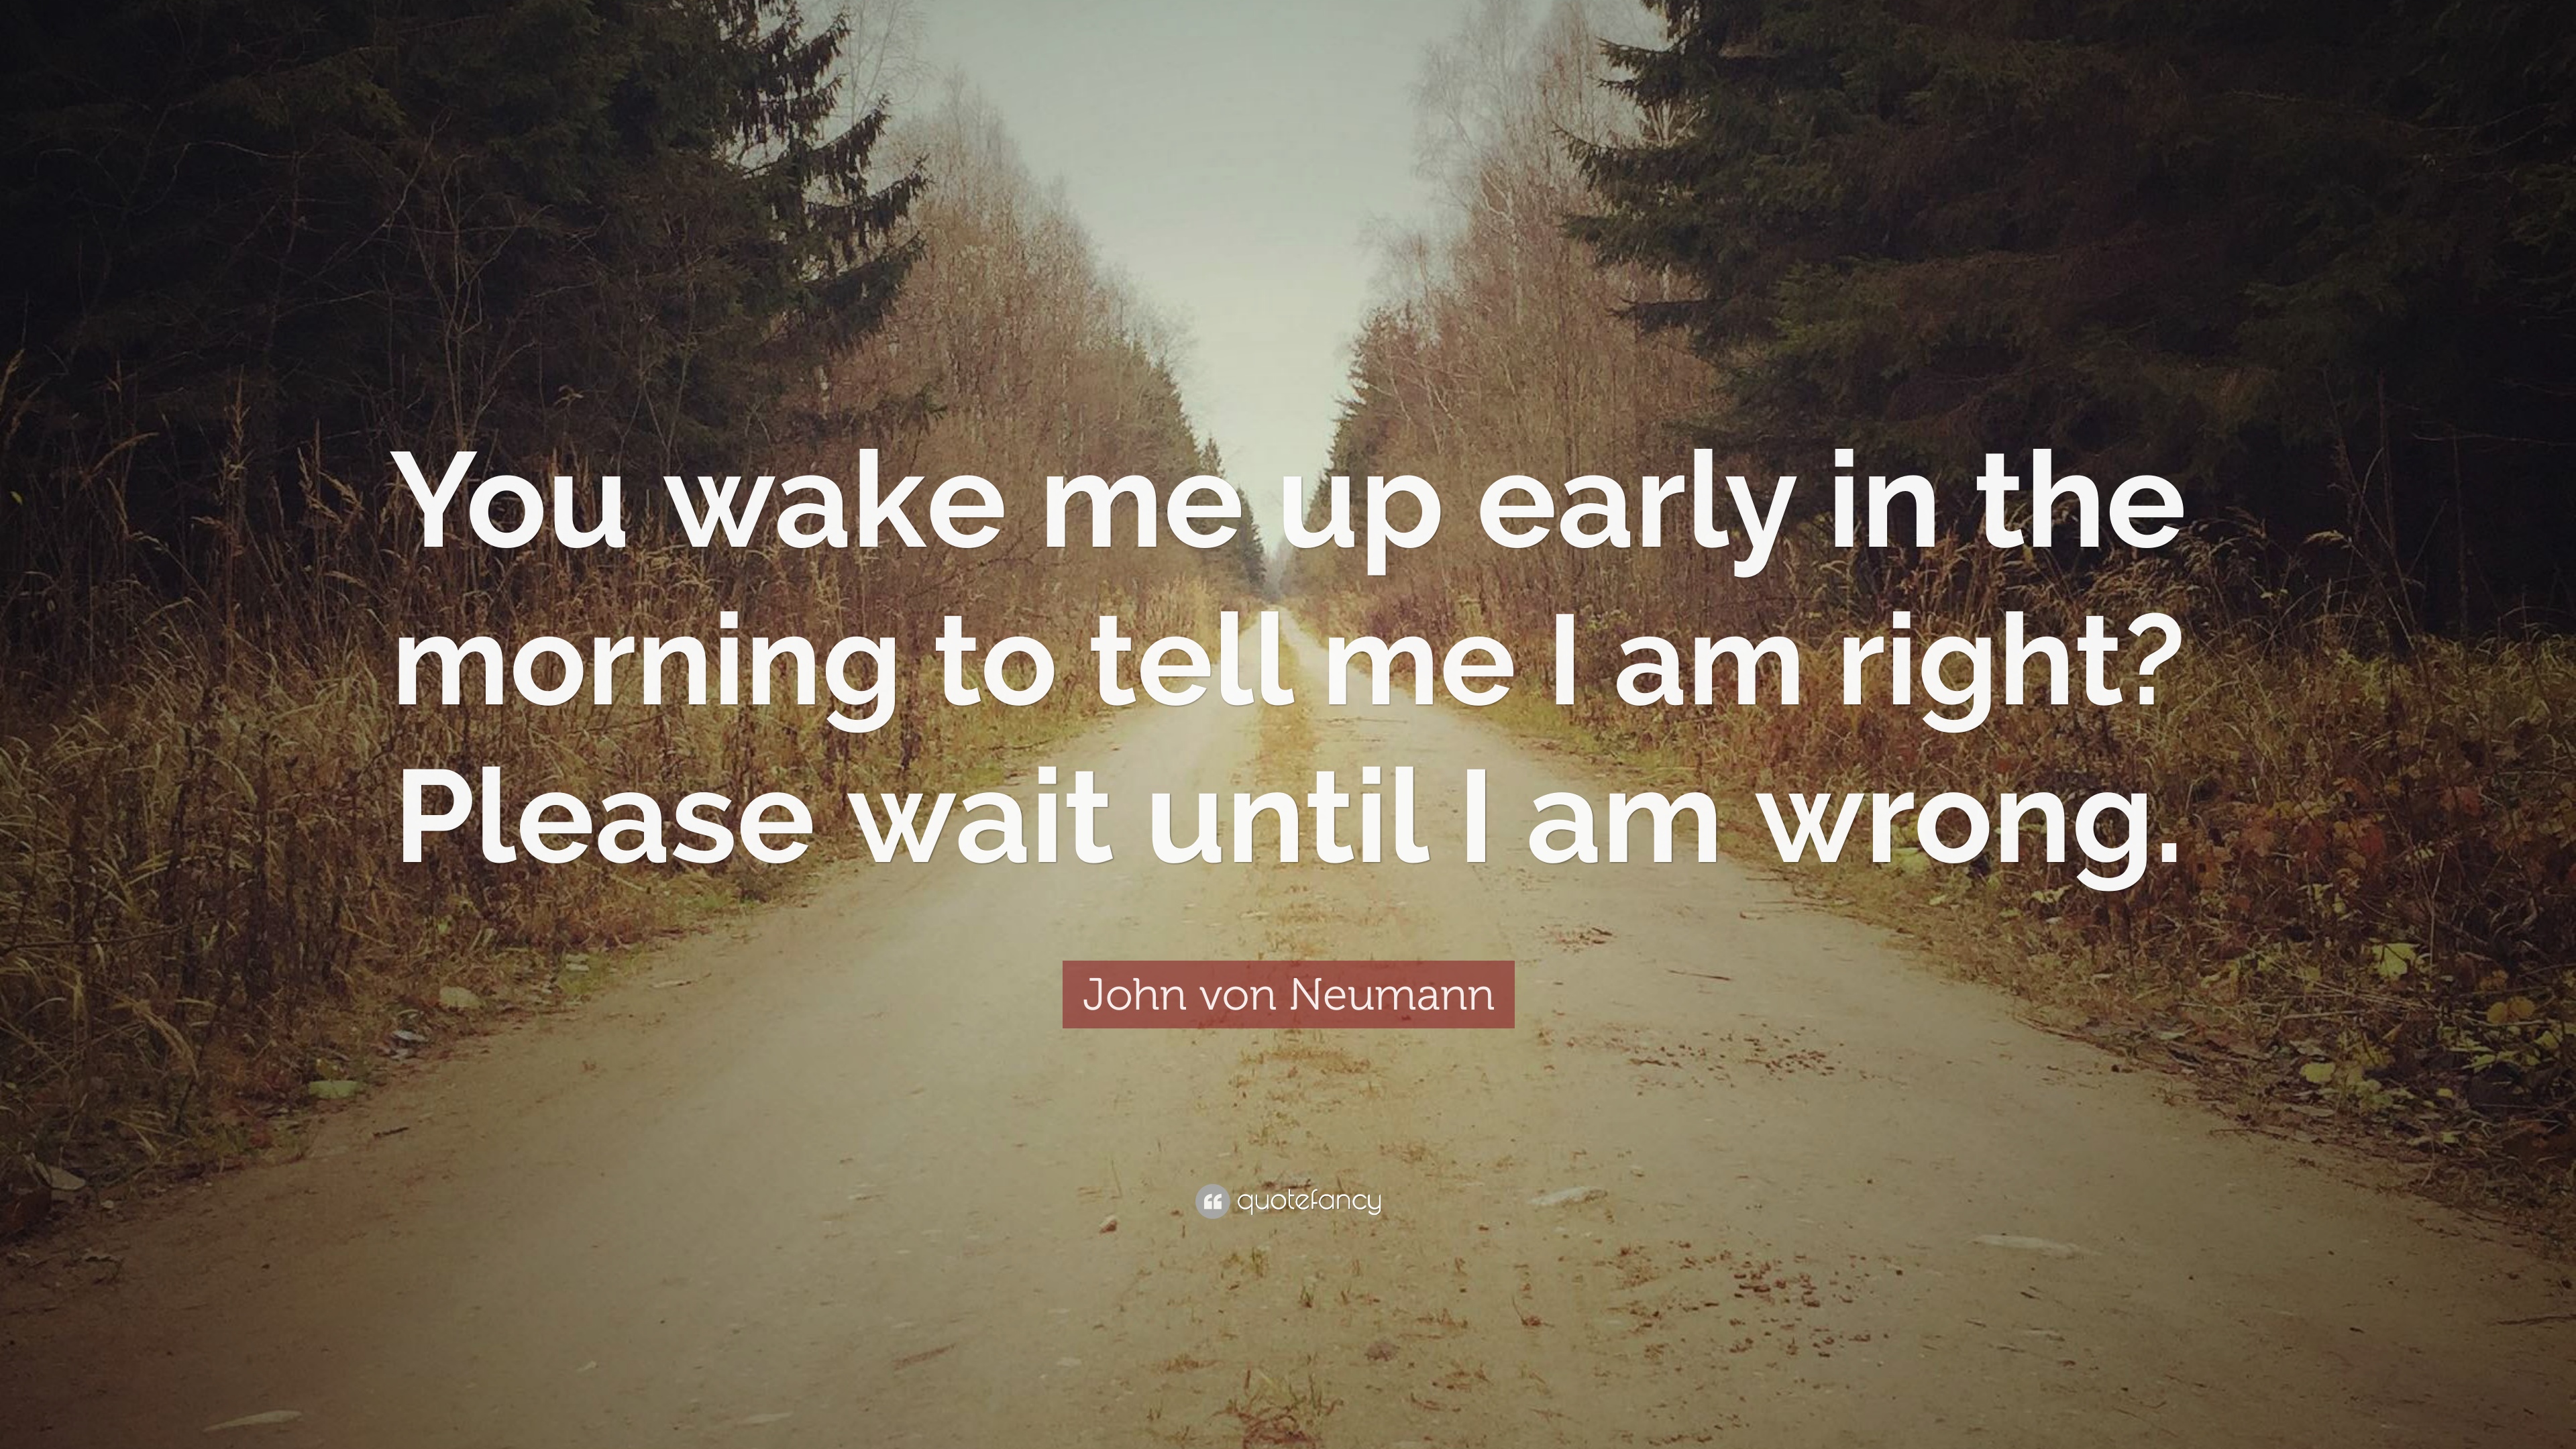 John von Neumann Quote: “You wake me up early in the morning to tell